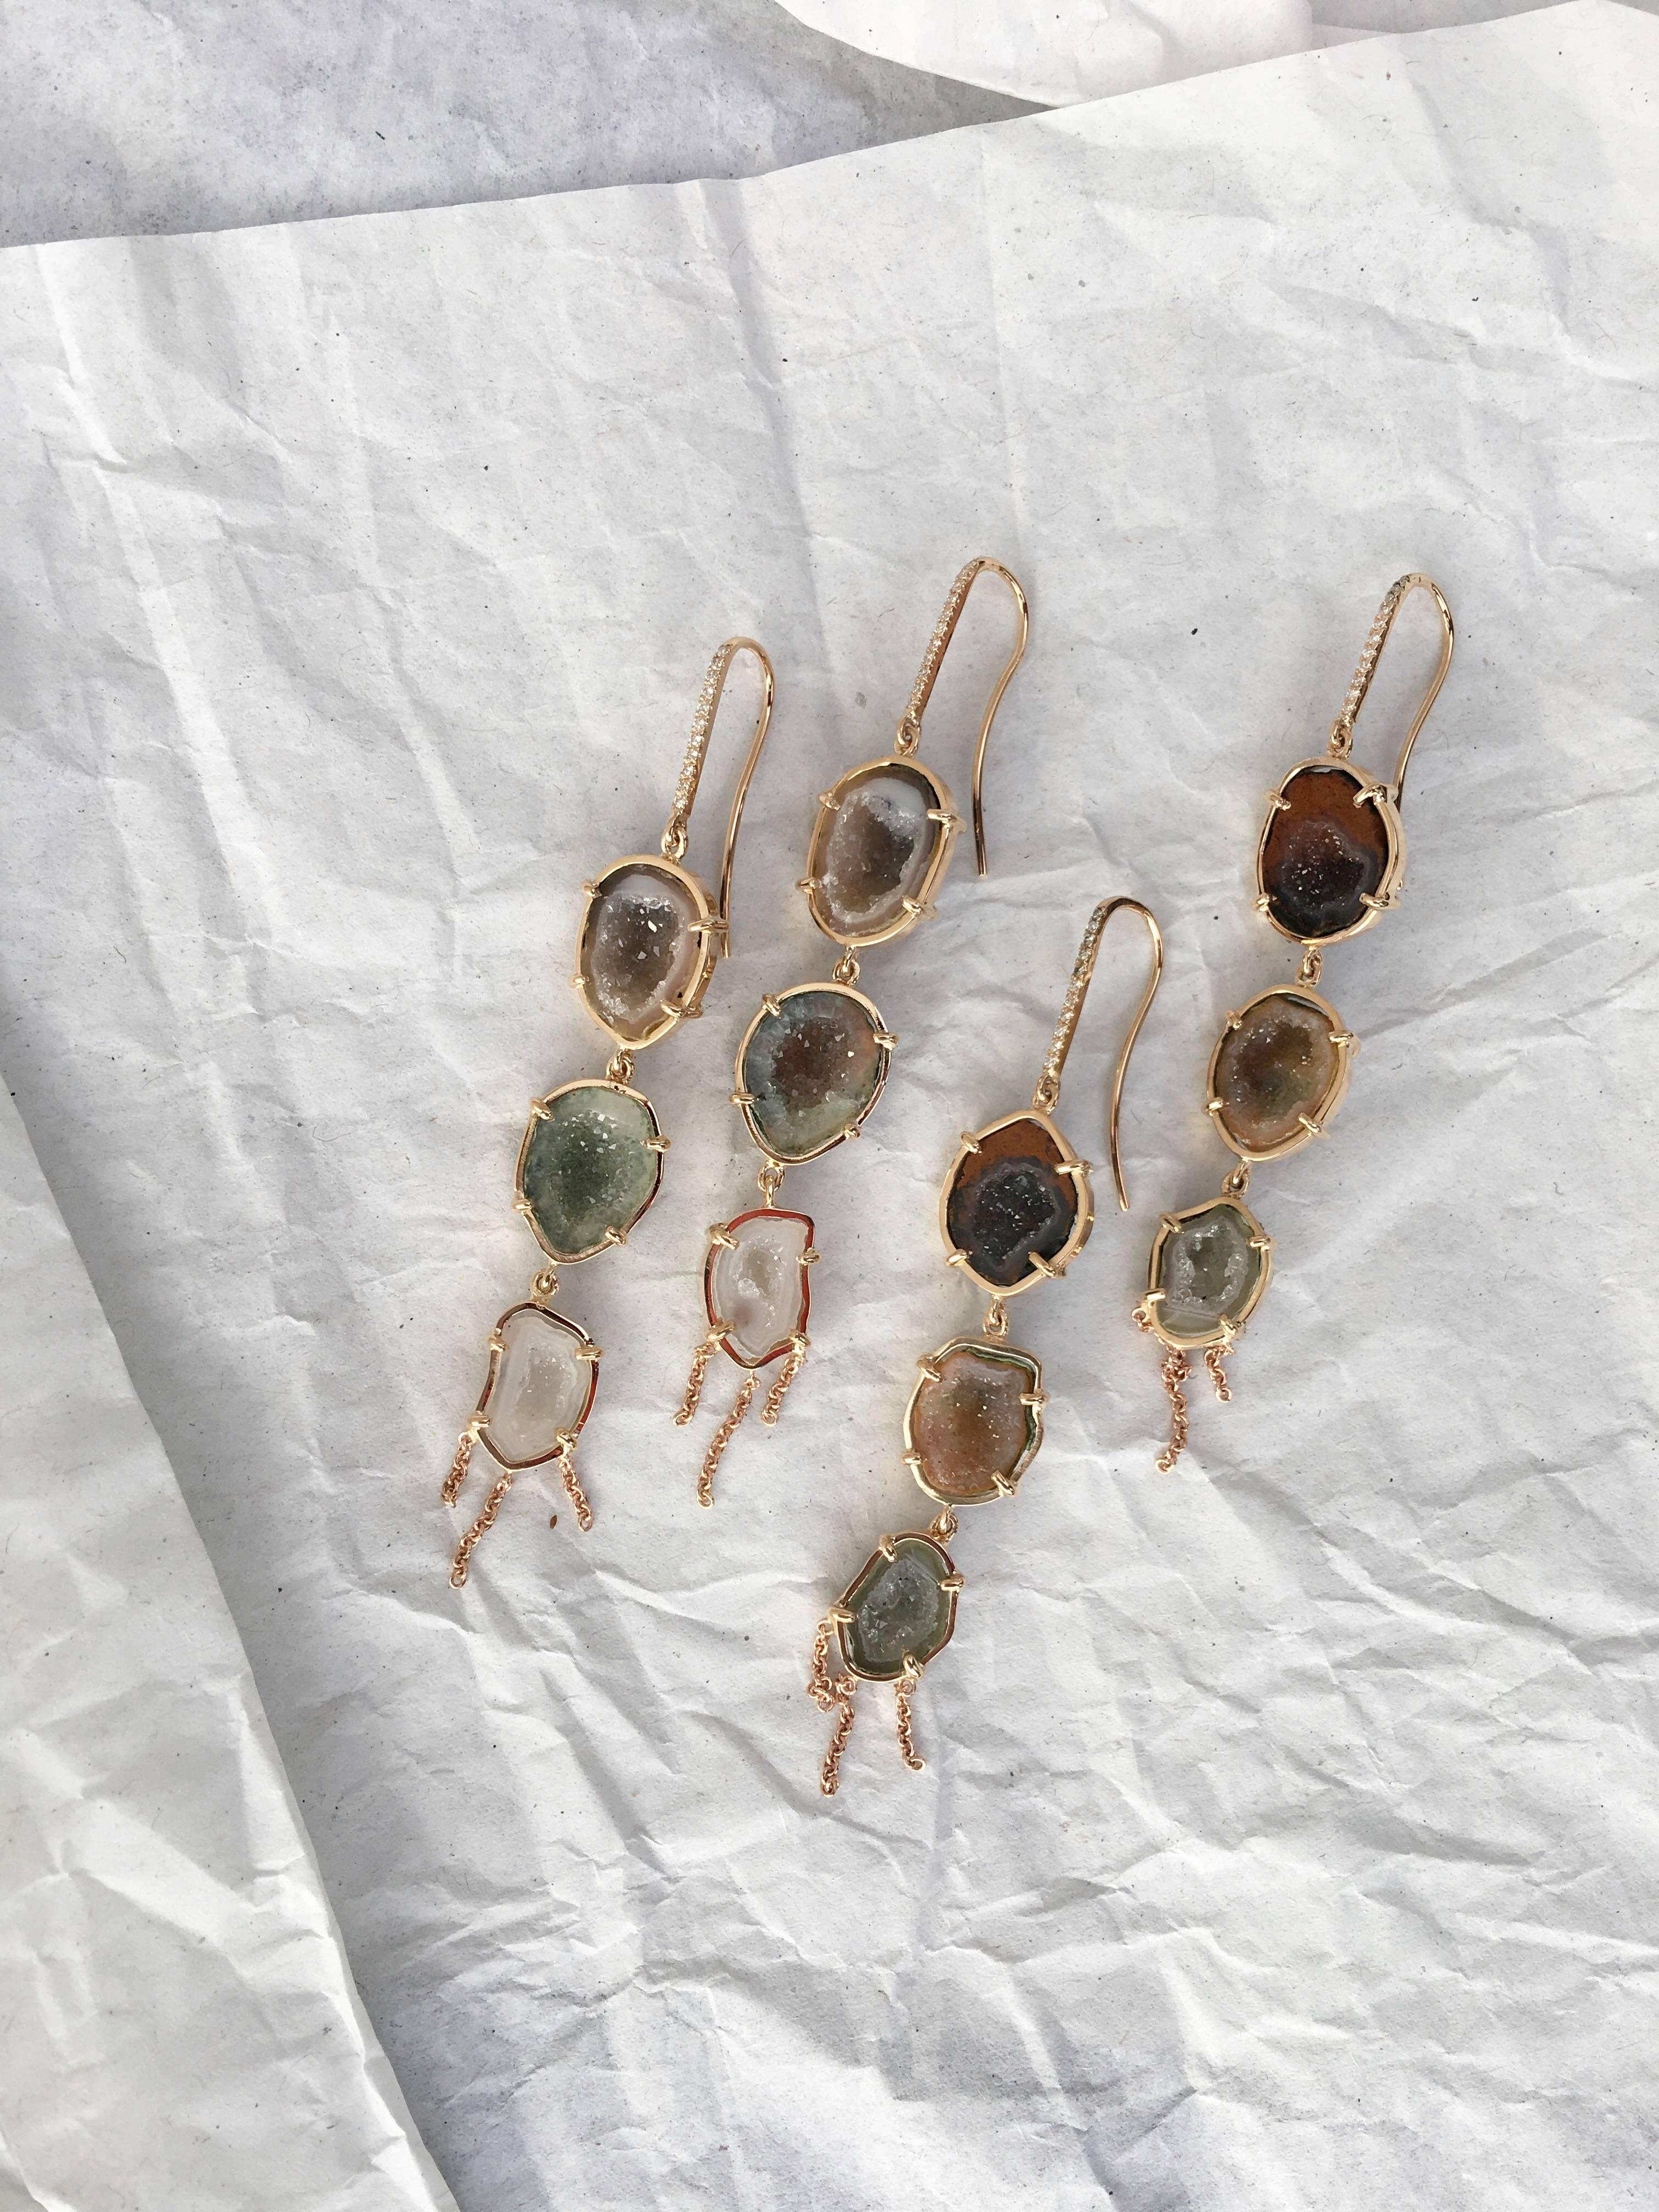 Earrings like a waterfall...
These beauties are set with 18 k rose gold and blue colored agate geodes.
With little Gvs diamonds ont he hook, they will complete your outfit, day or nights.
